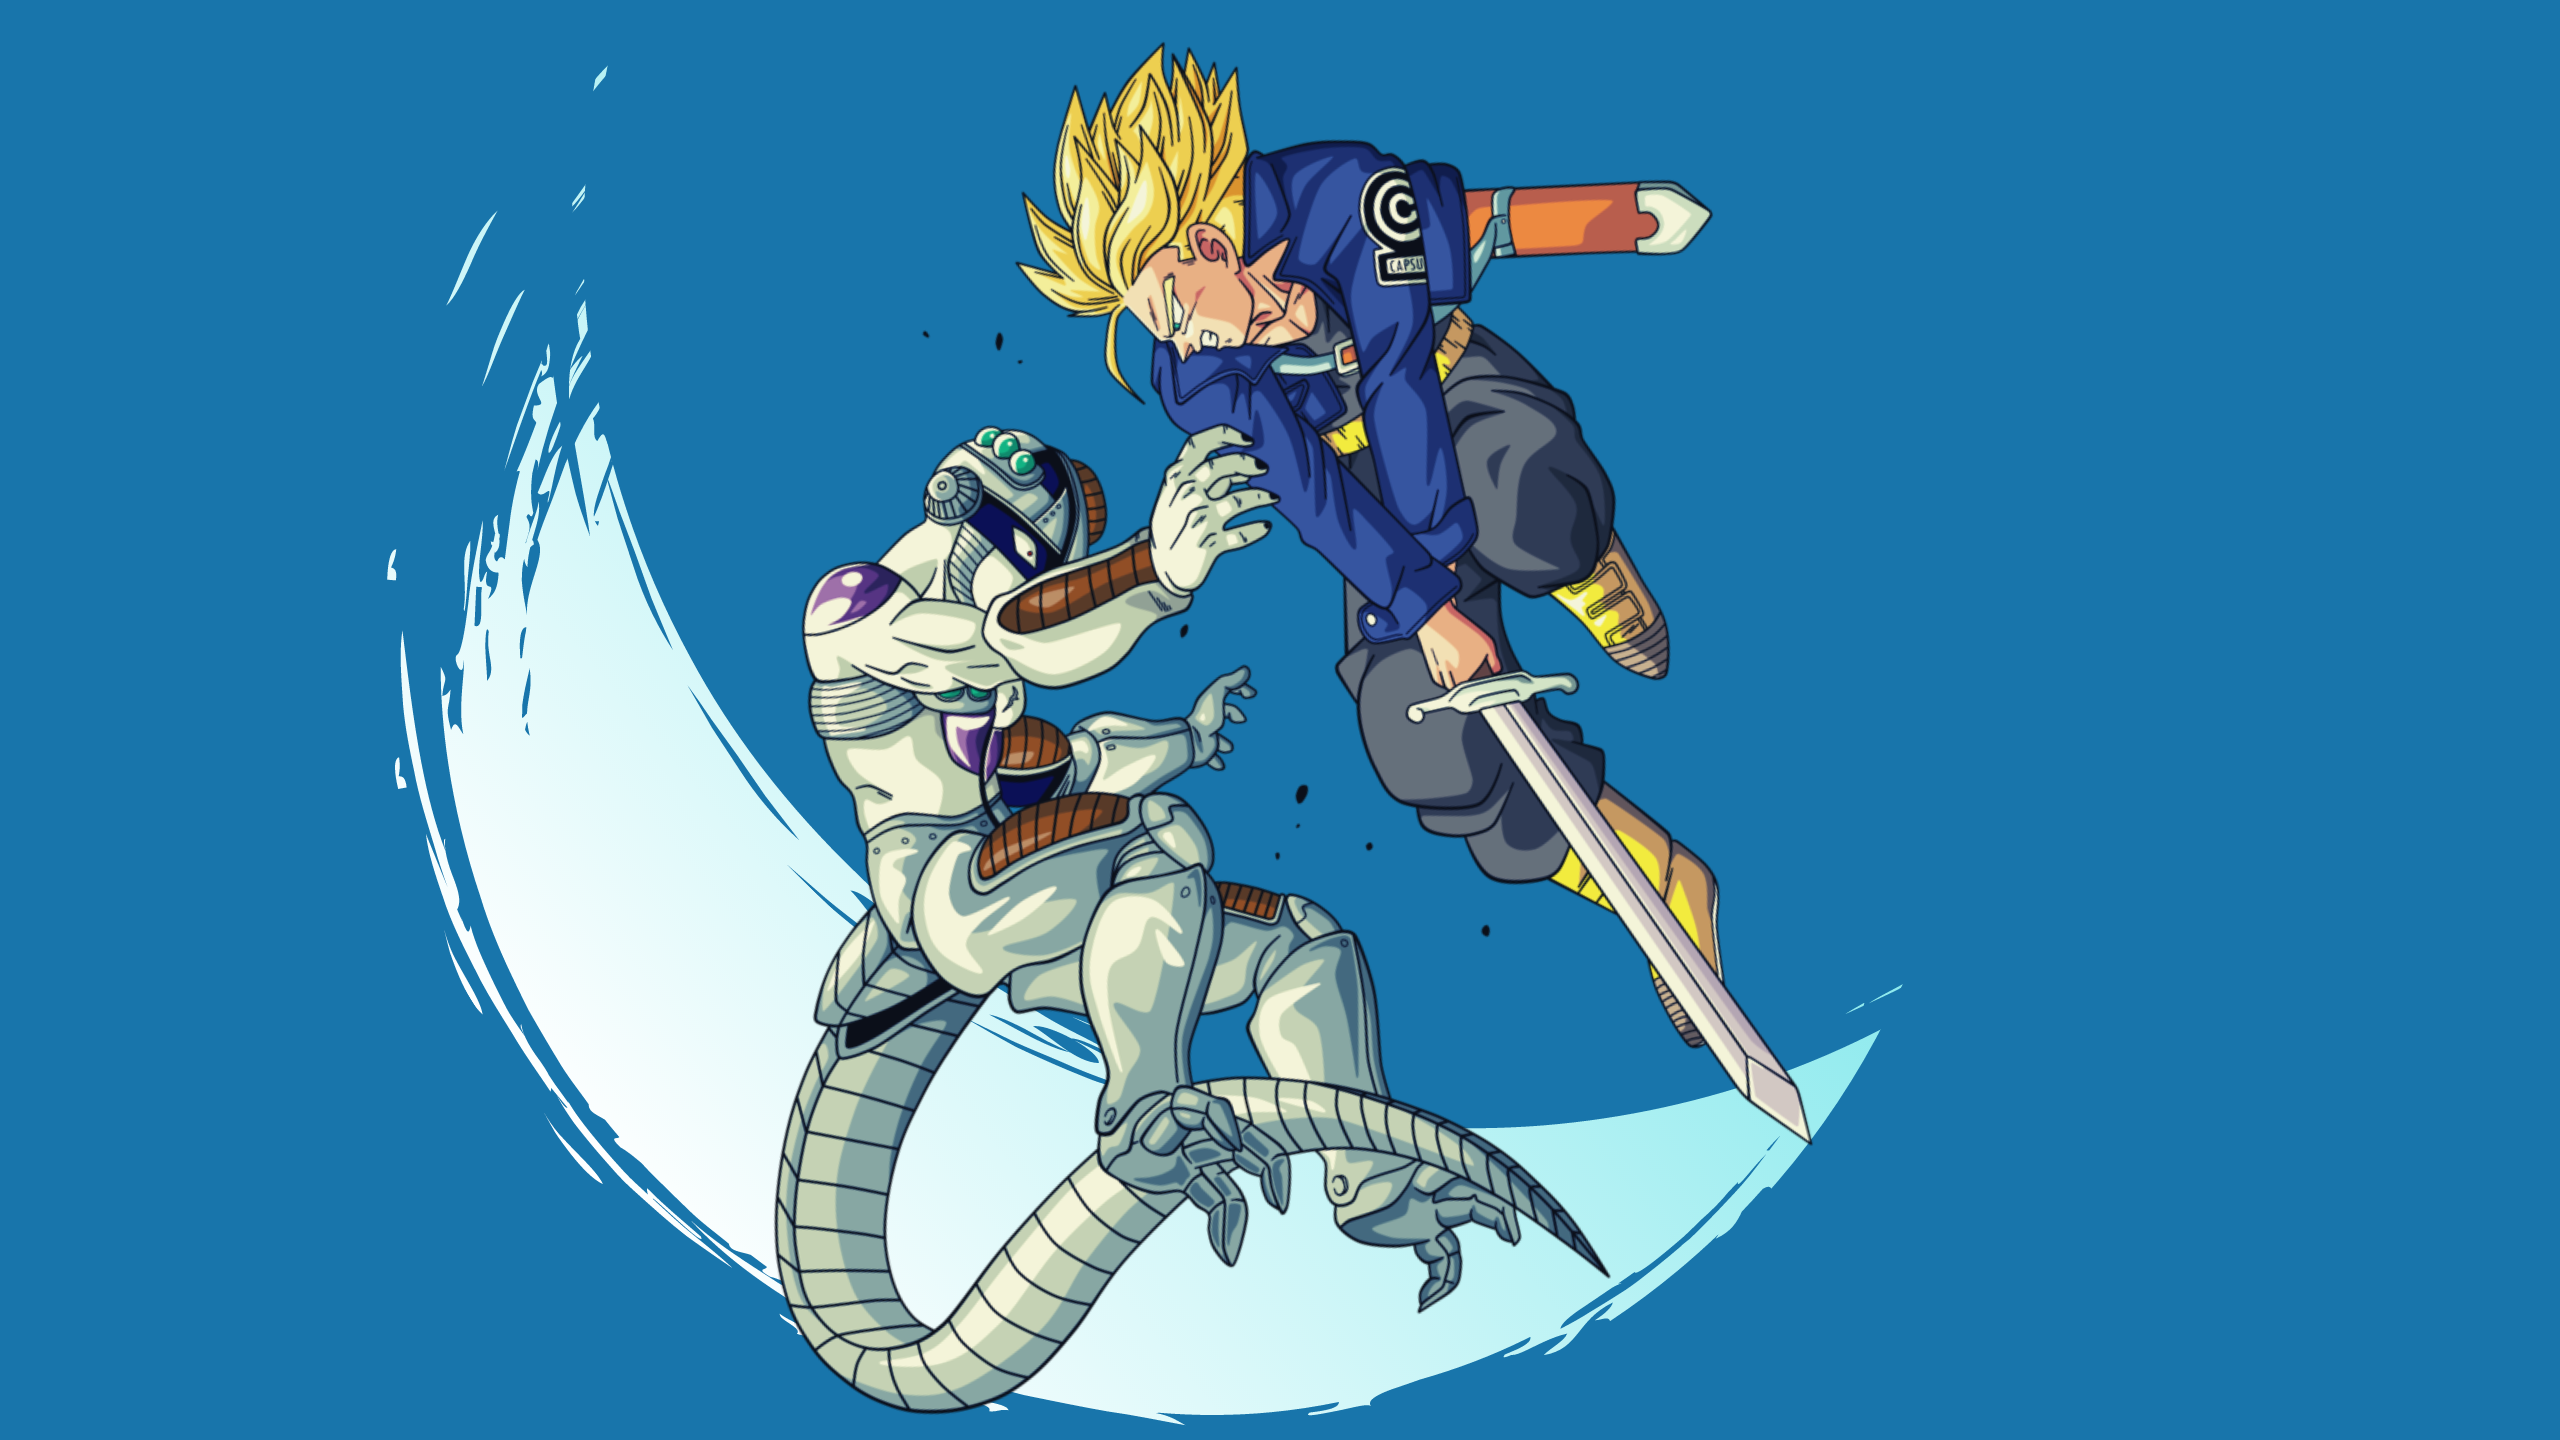 Simple Wallpaper of Trunks ]2560x1440 works also for 1920x1080